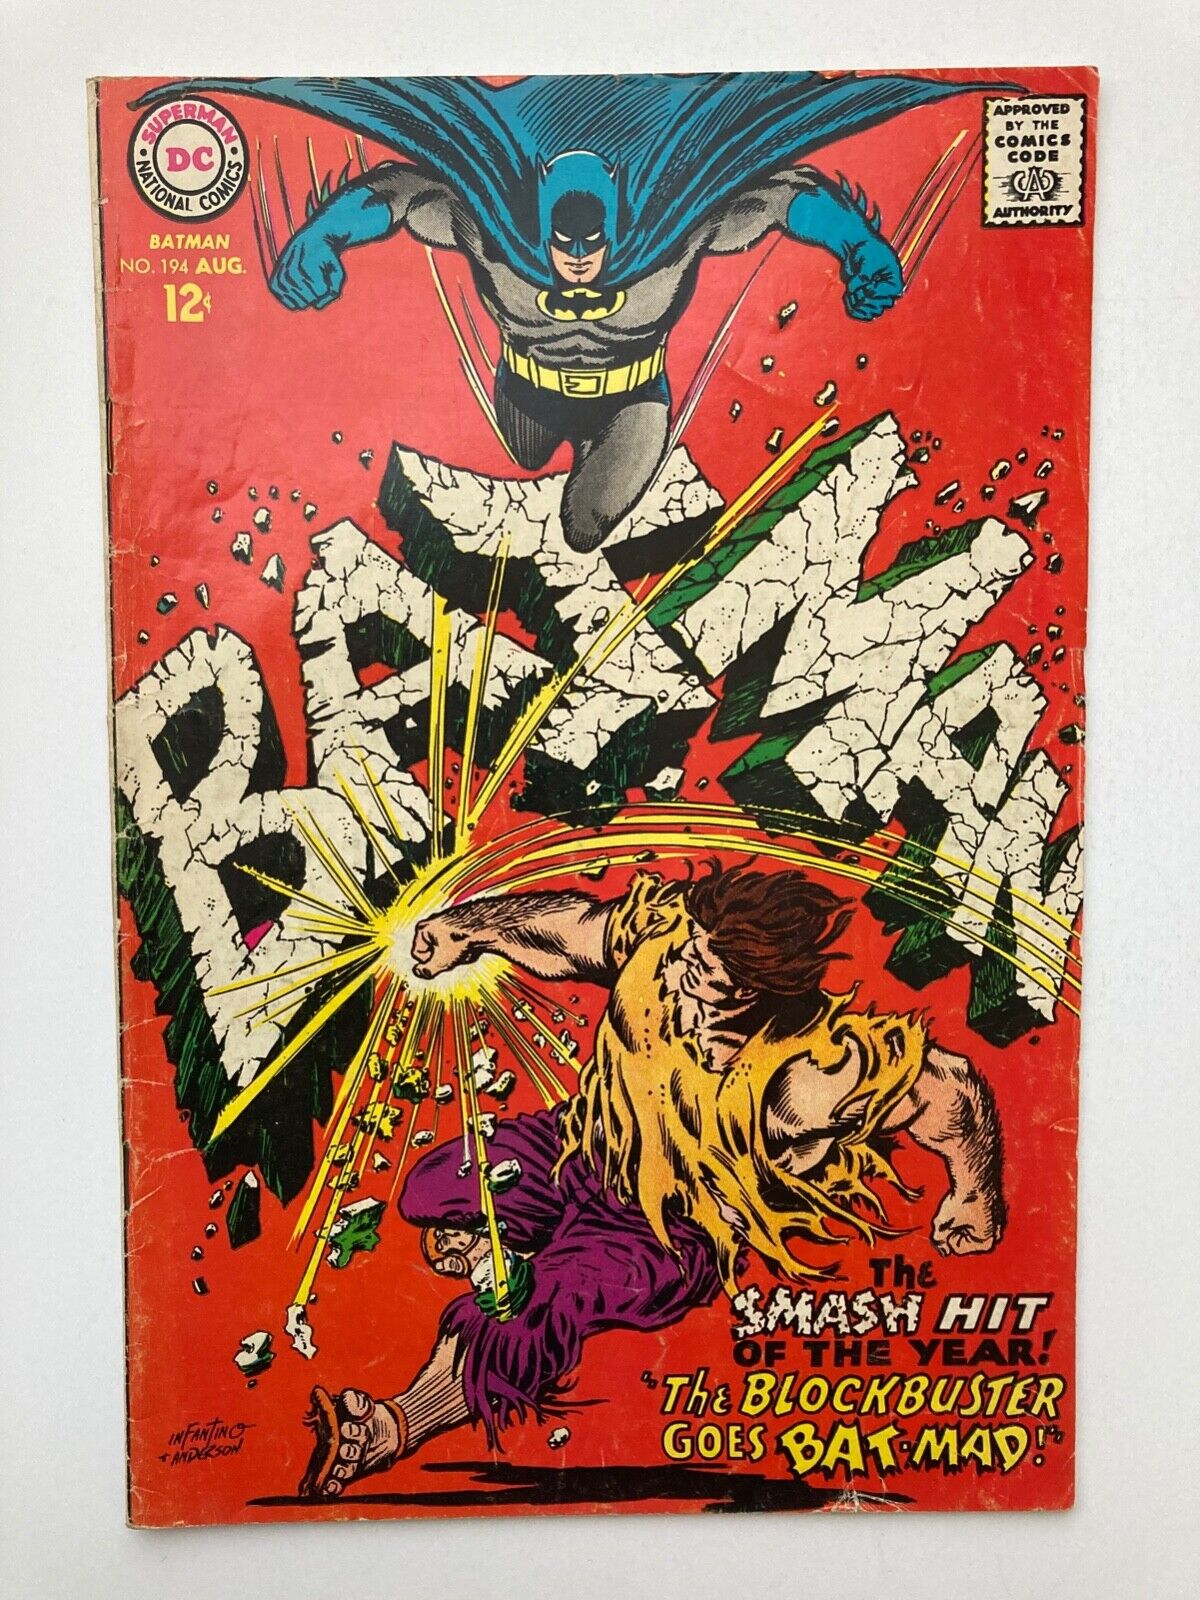 BATMAN #194- THE BLOCKBUSTER SMASH DEAL OF THE YEAR ON EBAY GIVE OR TAKE.